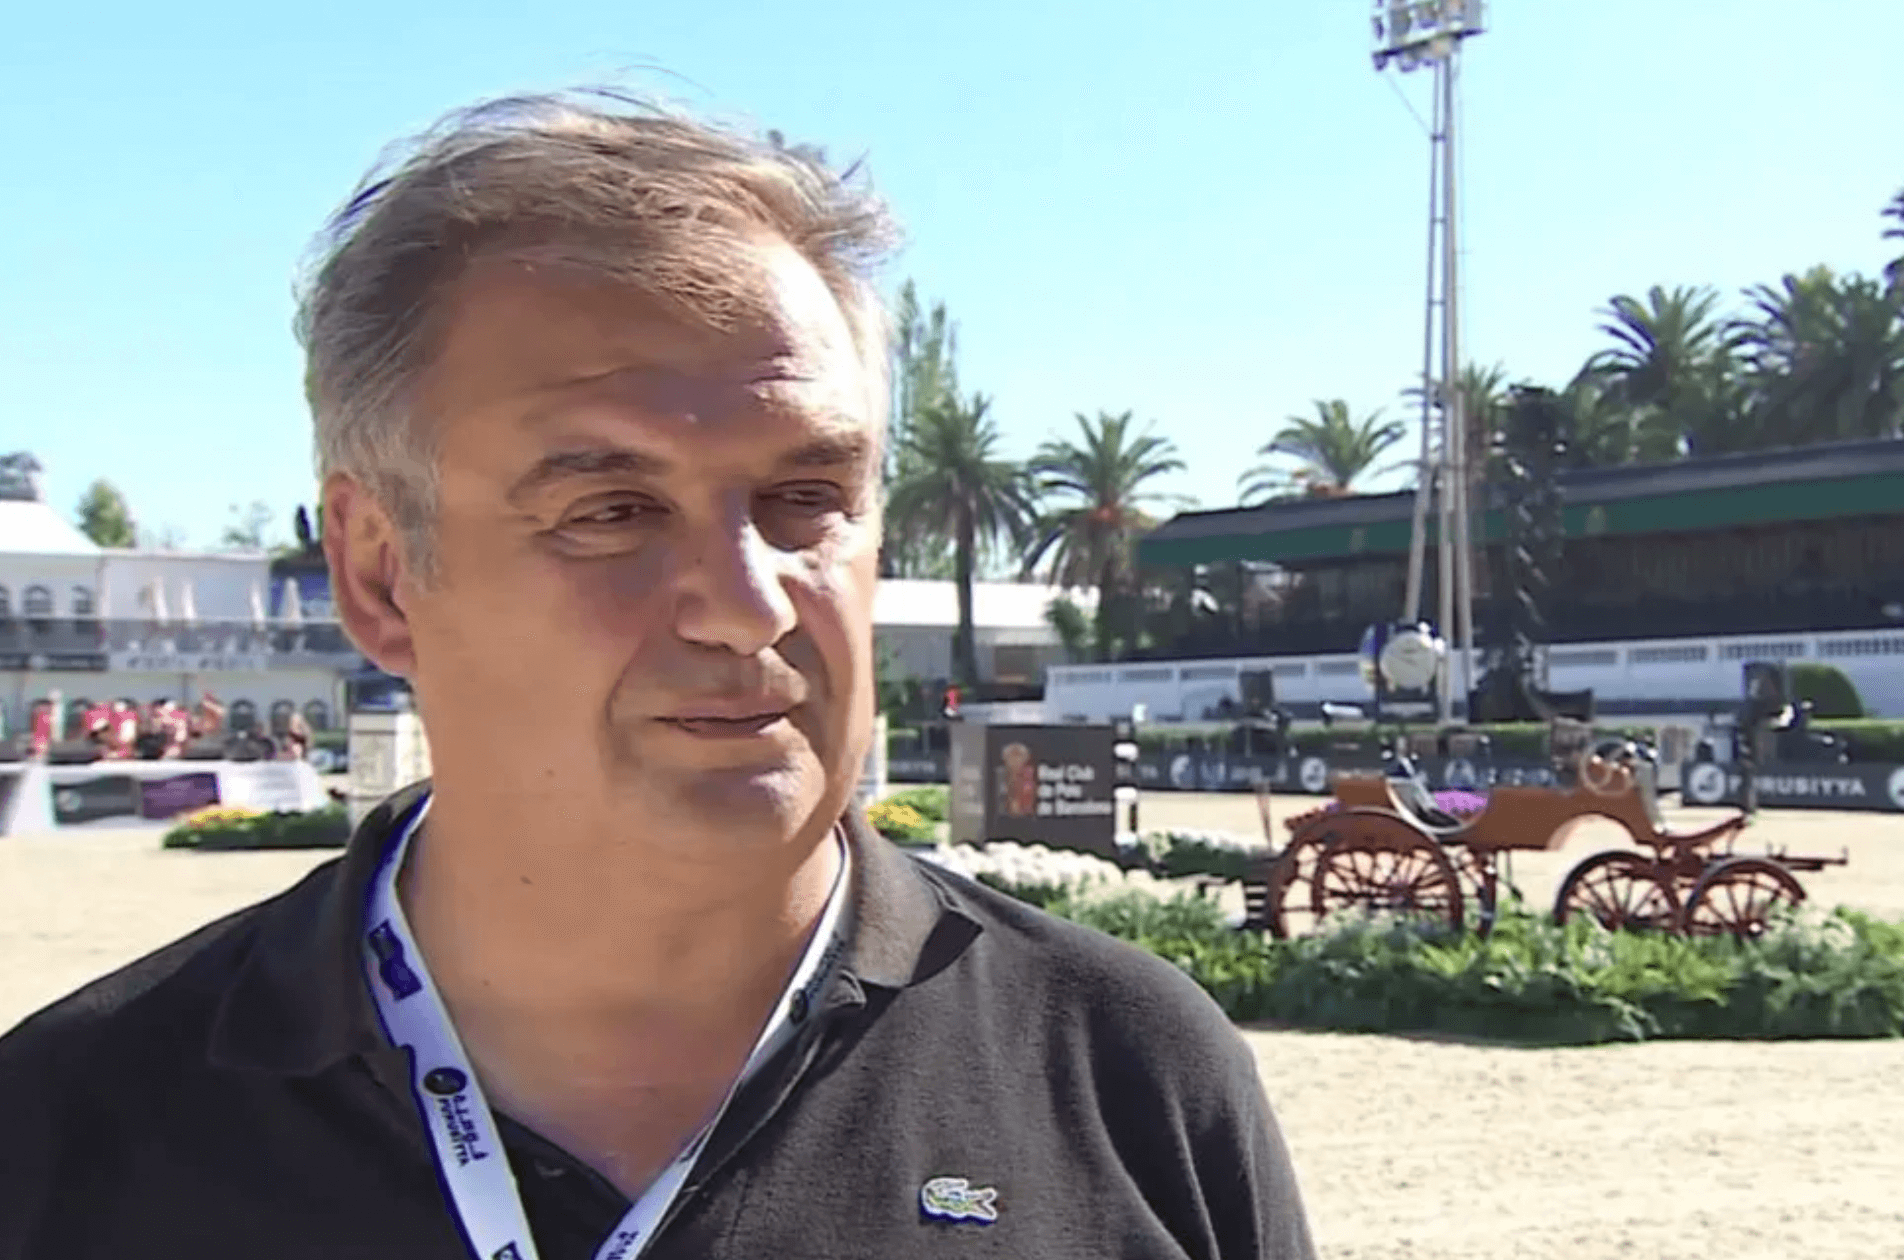 FEI Jumping Director Marco Fusté passed away